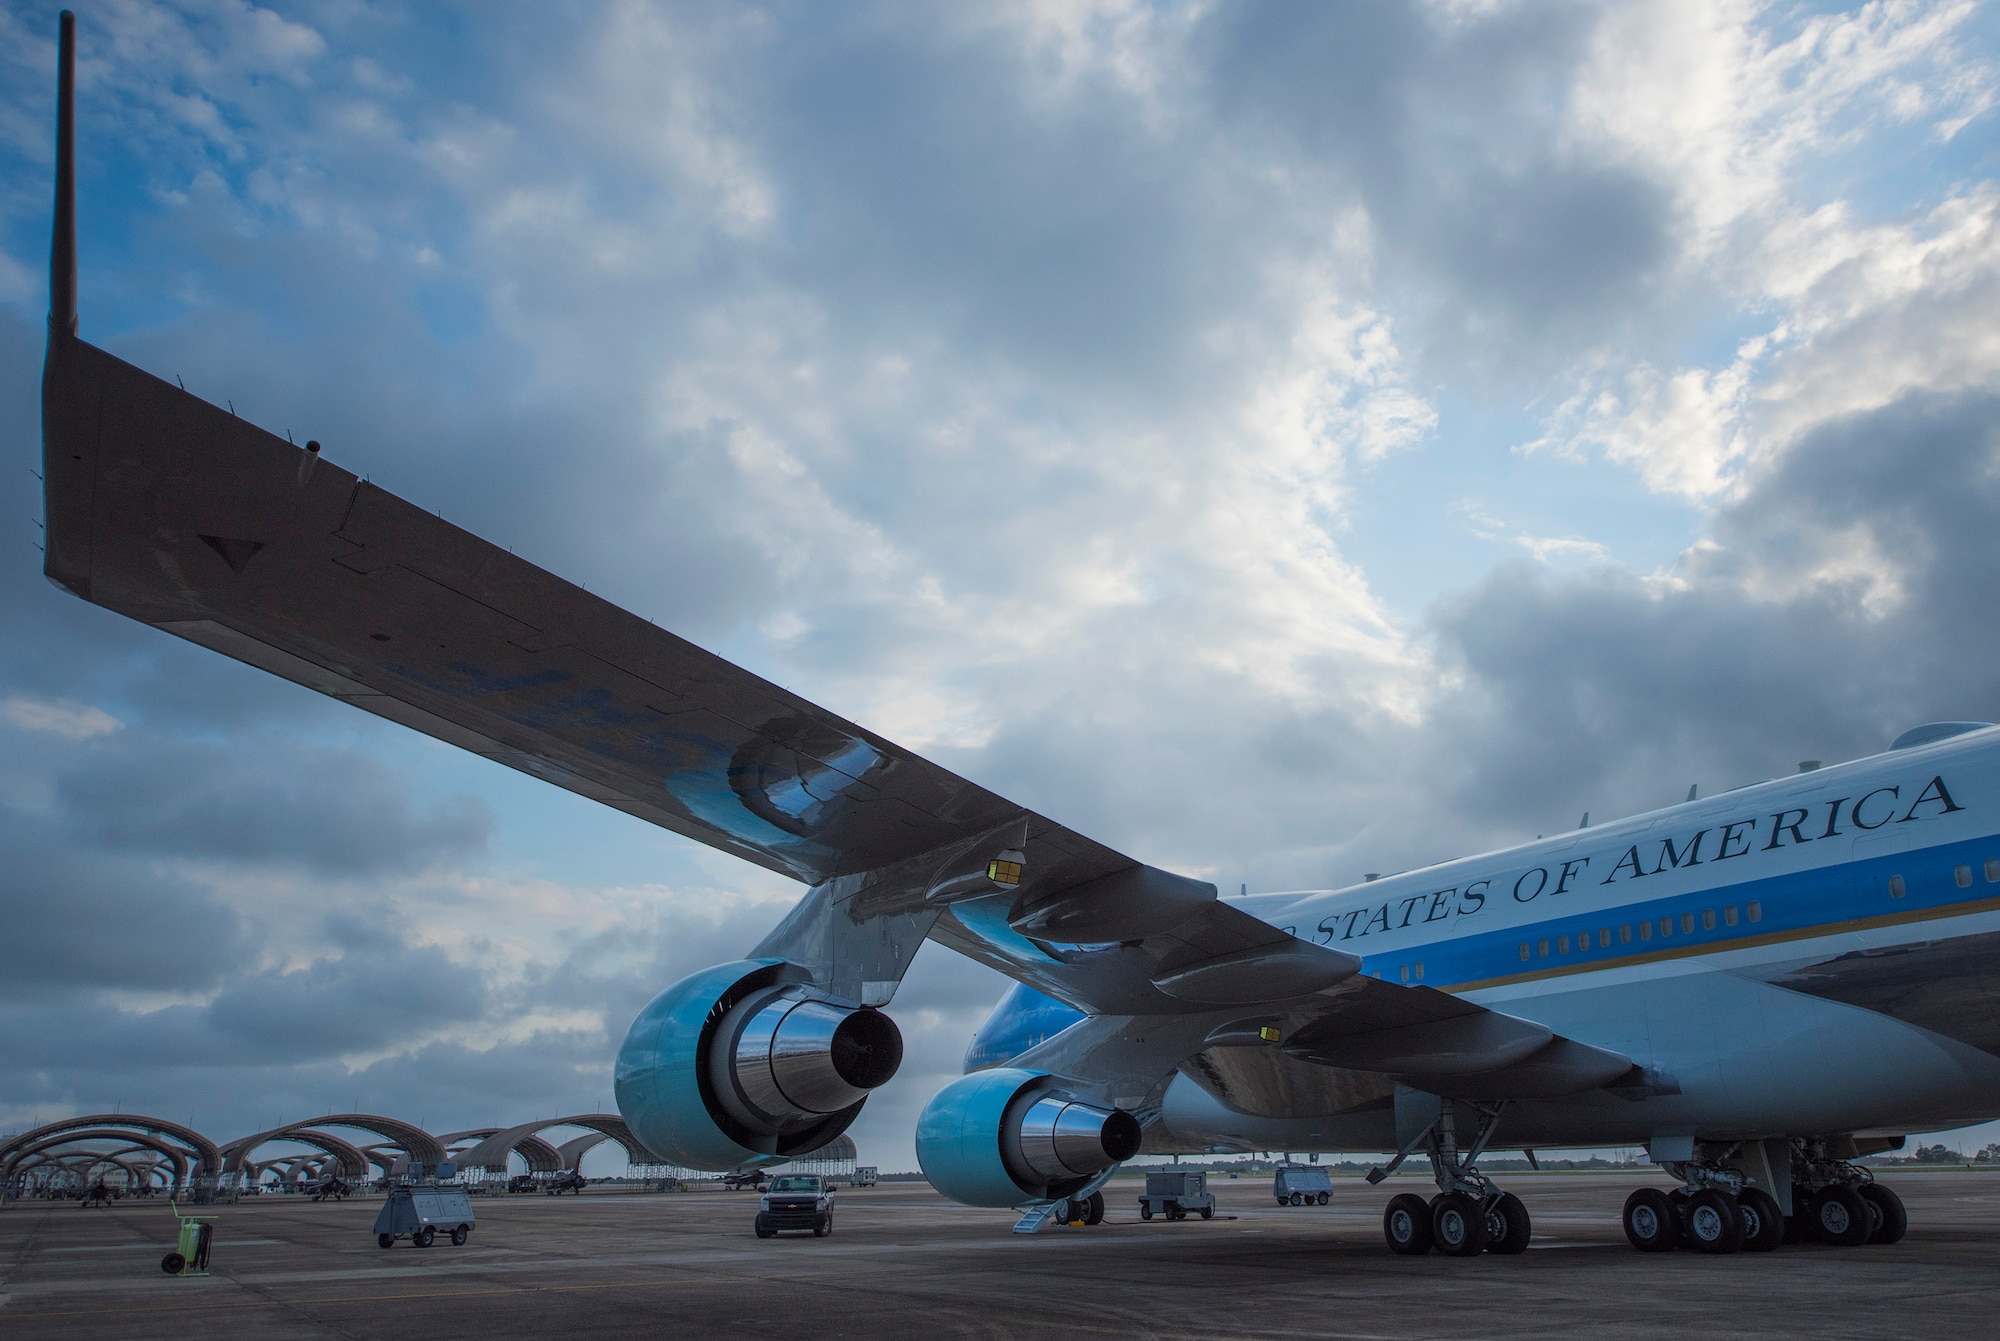 A Boeing 747 VC-25A sits on the flightline April 19 at Eglin Air Force Base, Fla. The aircraft is one of two VC-25As assigned to the Presidential Airlift Group, 89th Airlift Wing at Joint Base Andrews, Maryland. The VC-25A is commonly known as "Air Force One," although that radio call sign is reserved and used exclusively when the President of the U.S. is aboard any U.S. Air Force aircraft. This aircraft was completing a maintenance cycle and is undergoing an operational test regimen before being certified to return to Presidential service. (U.S. Air Force photos/Ilka Cole) 